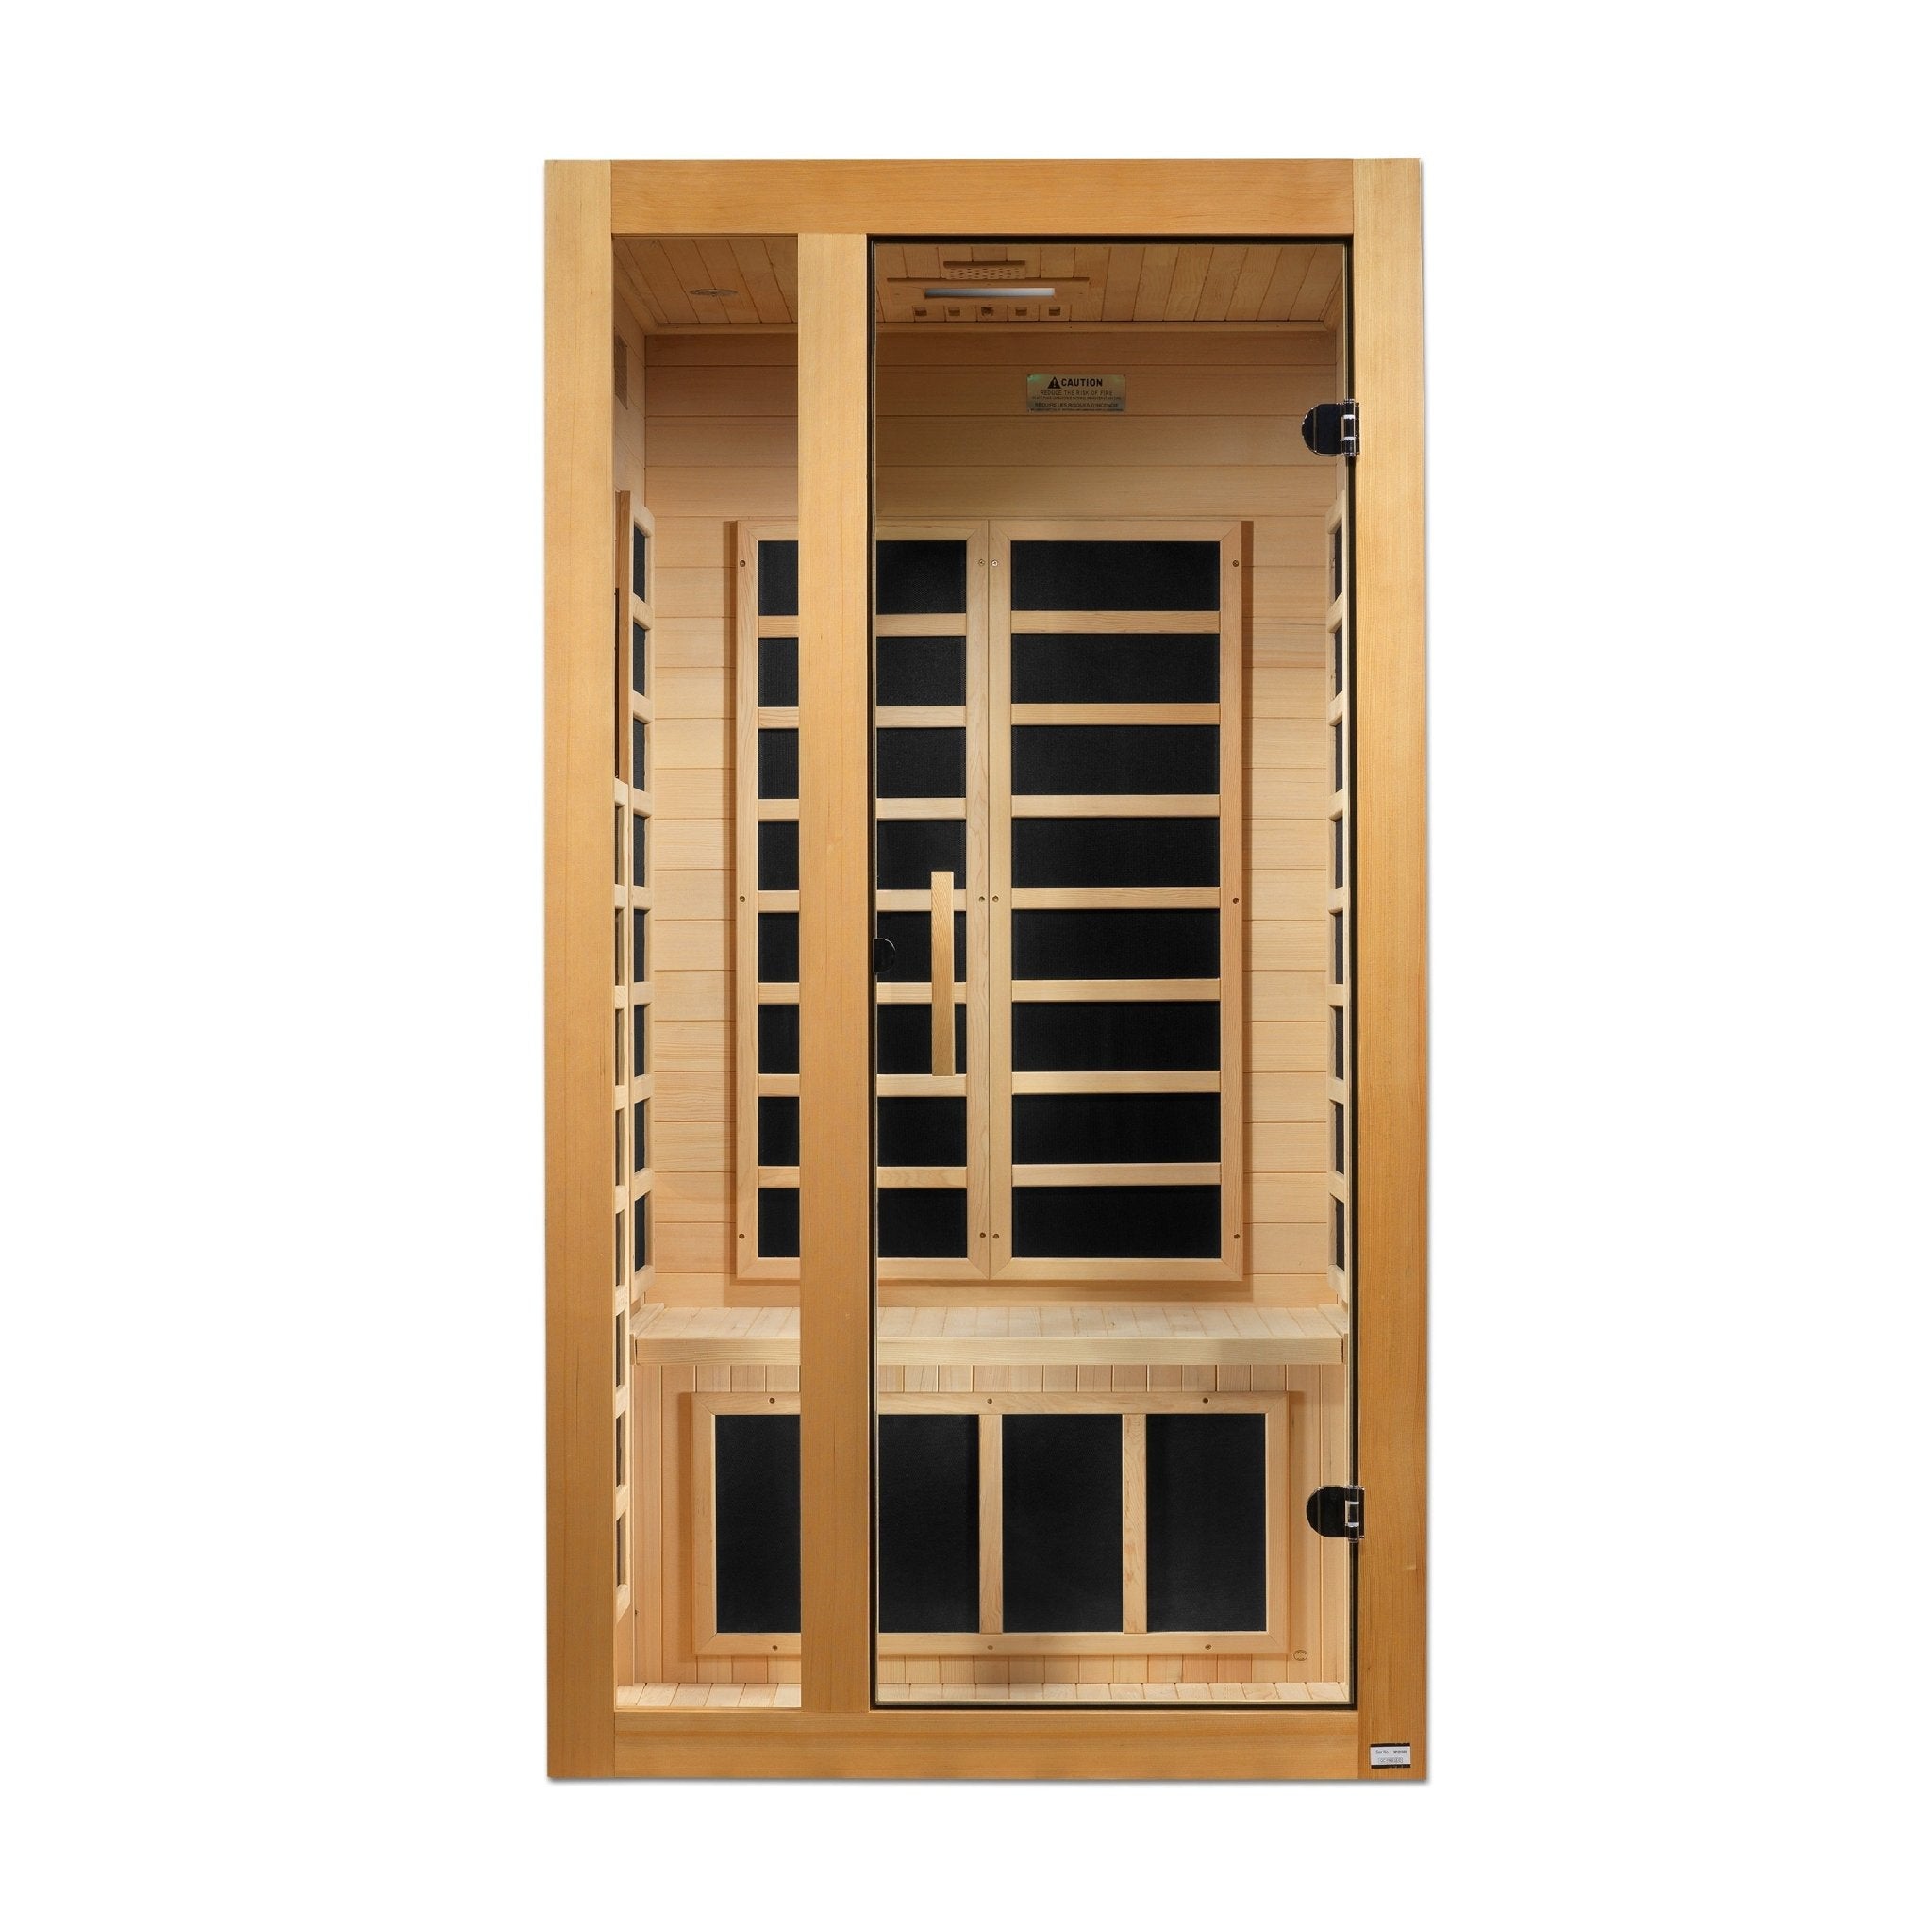 ***New 2021 Model*** Gracia - 1-2 Person Low EMF FAR Infrared Sauna - First Class Caves